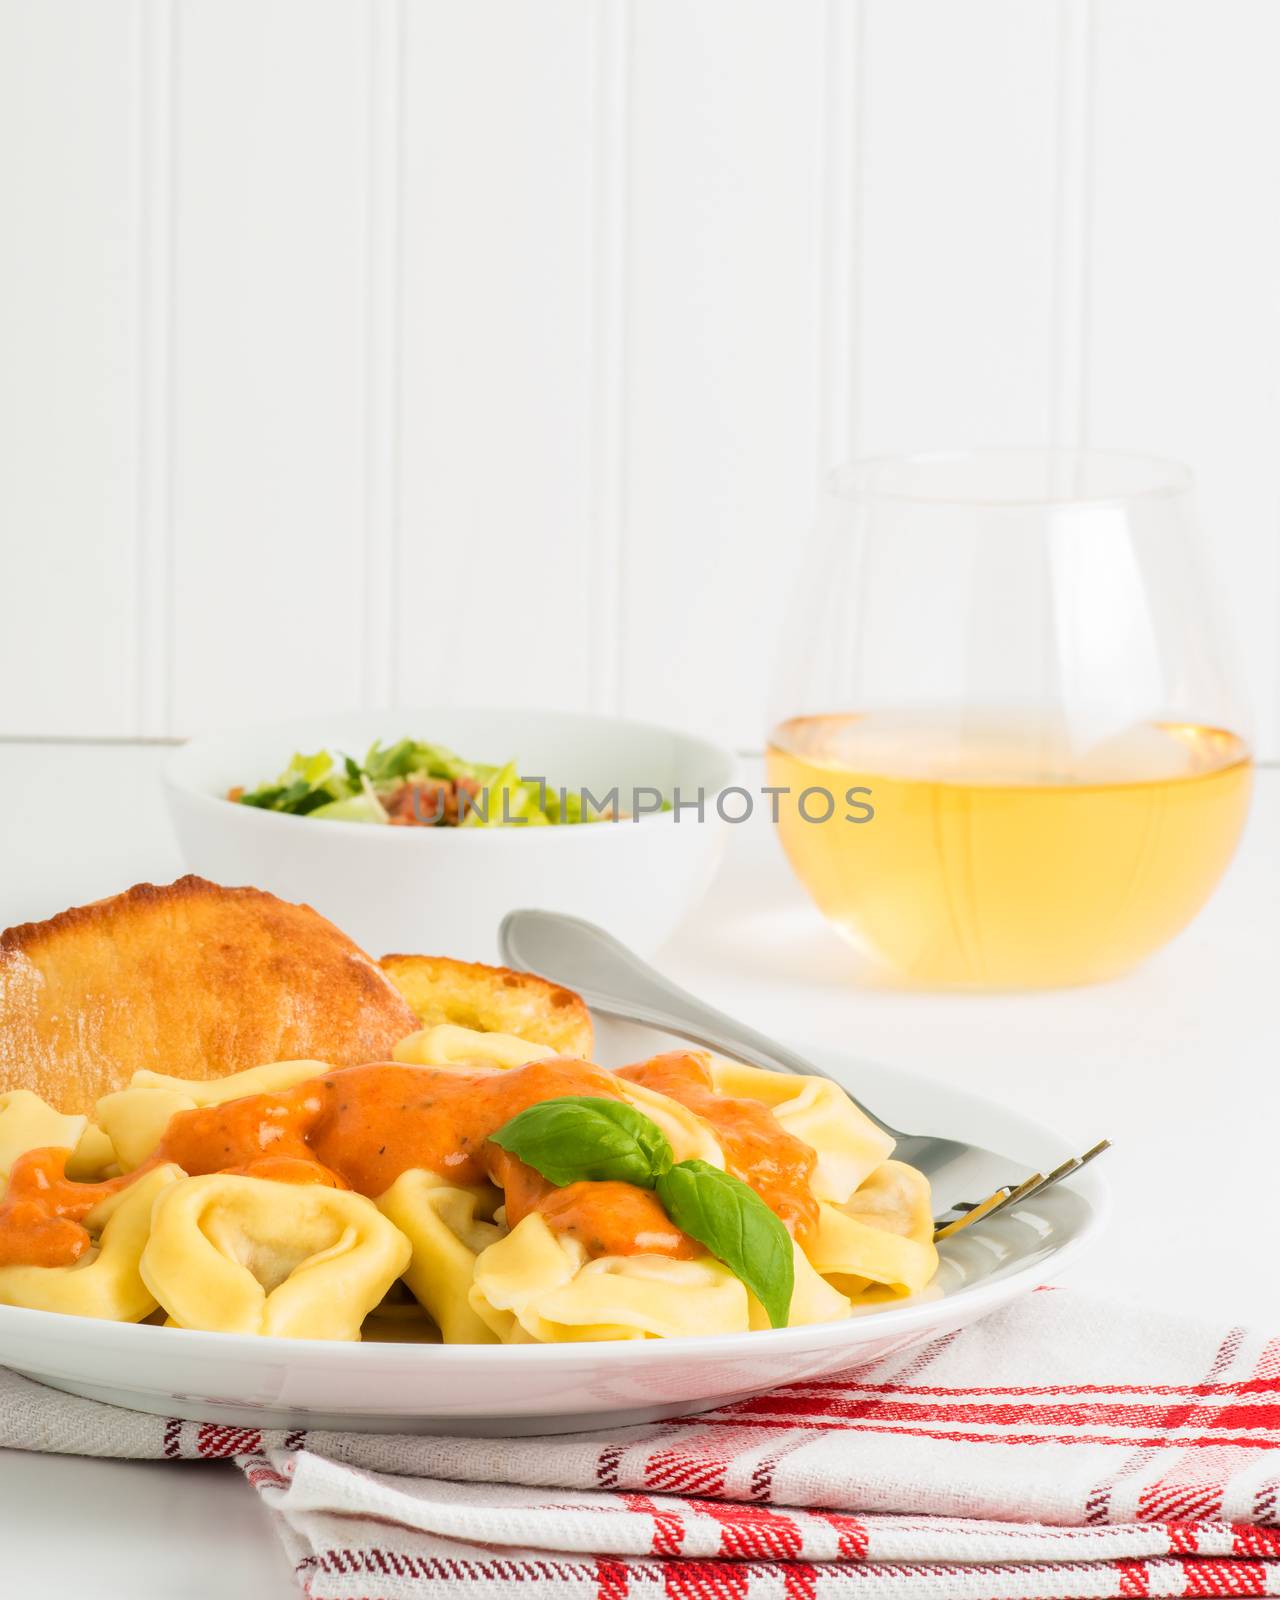 Meal of tortelloni and caesar salad.  Useful on menus and for other food services marketing.